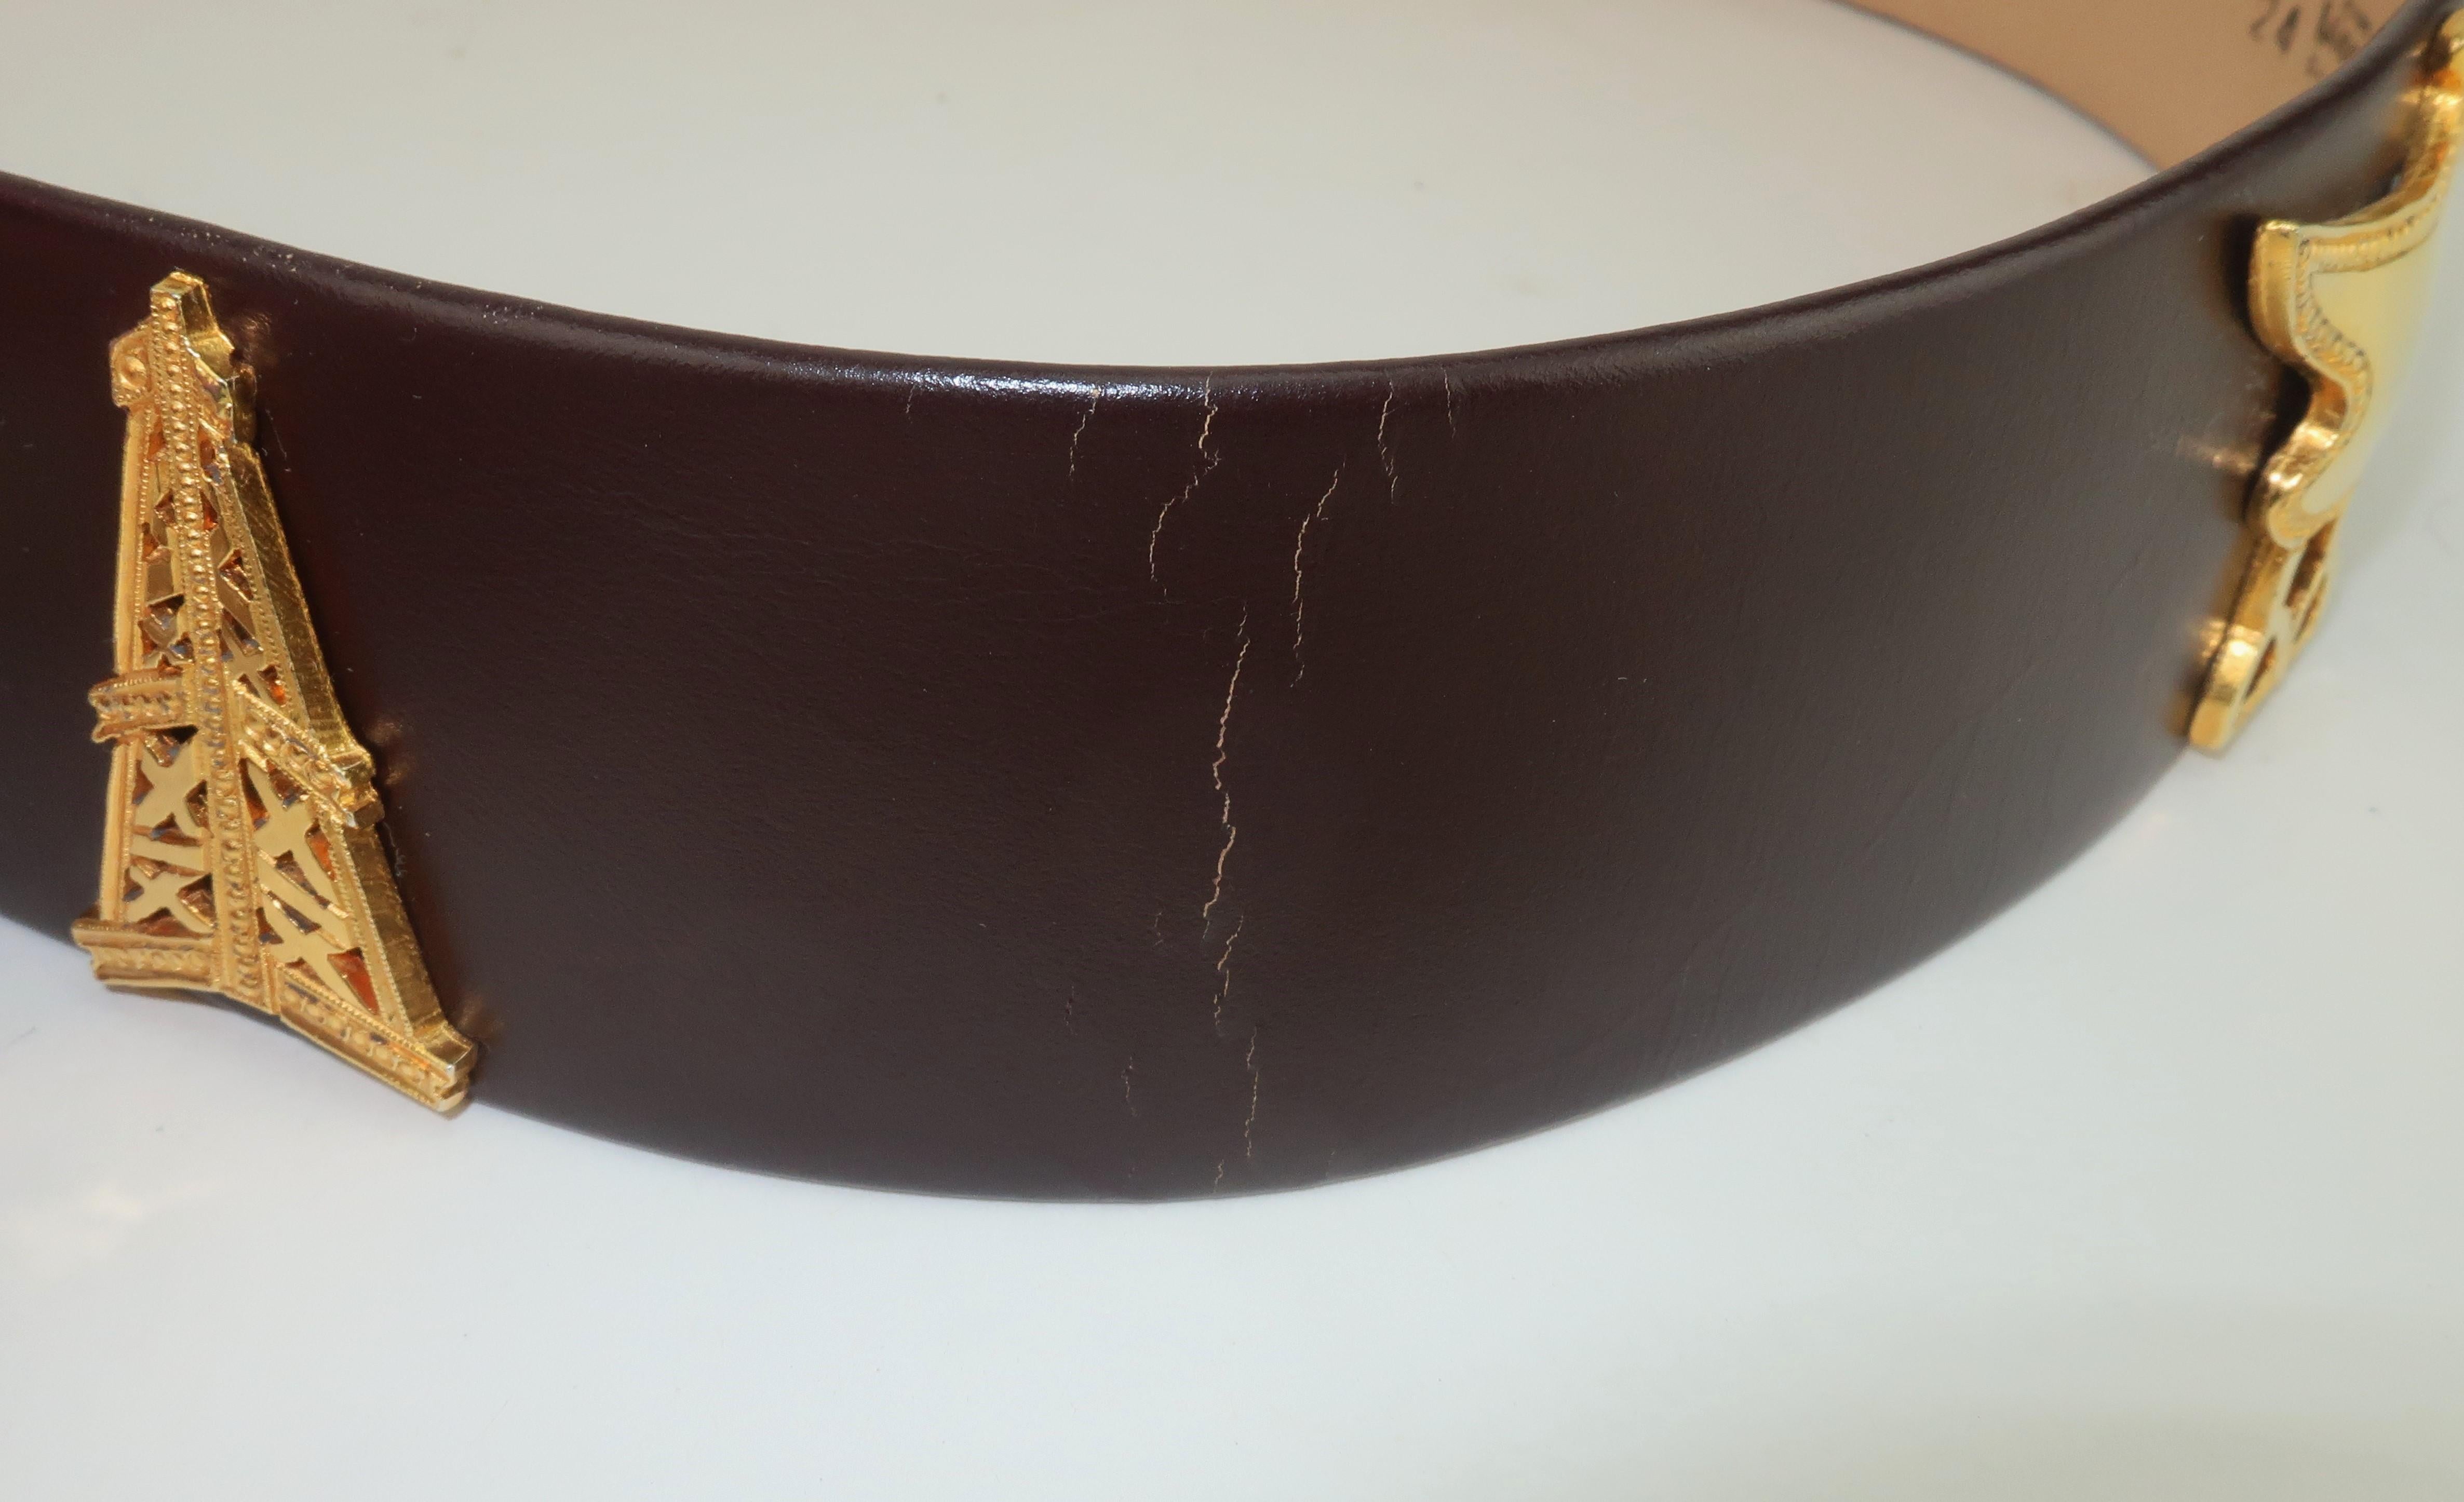 Neiman Marcus Texas Novelty Brown Leather Belt, 1960's For Sale 7